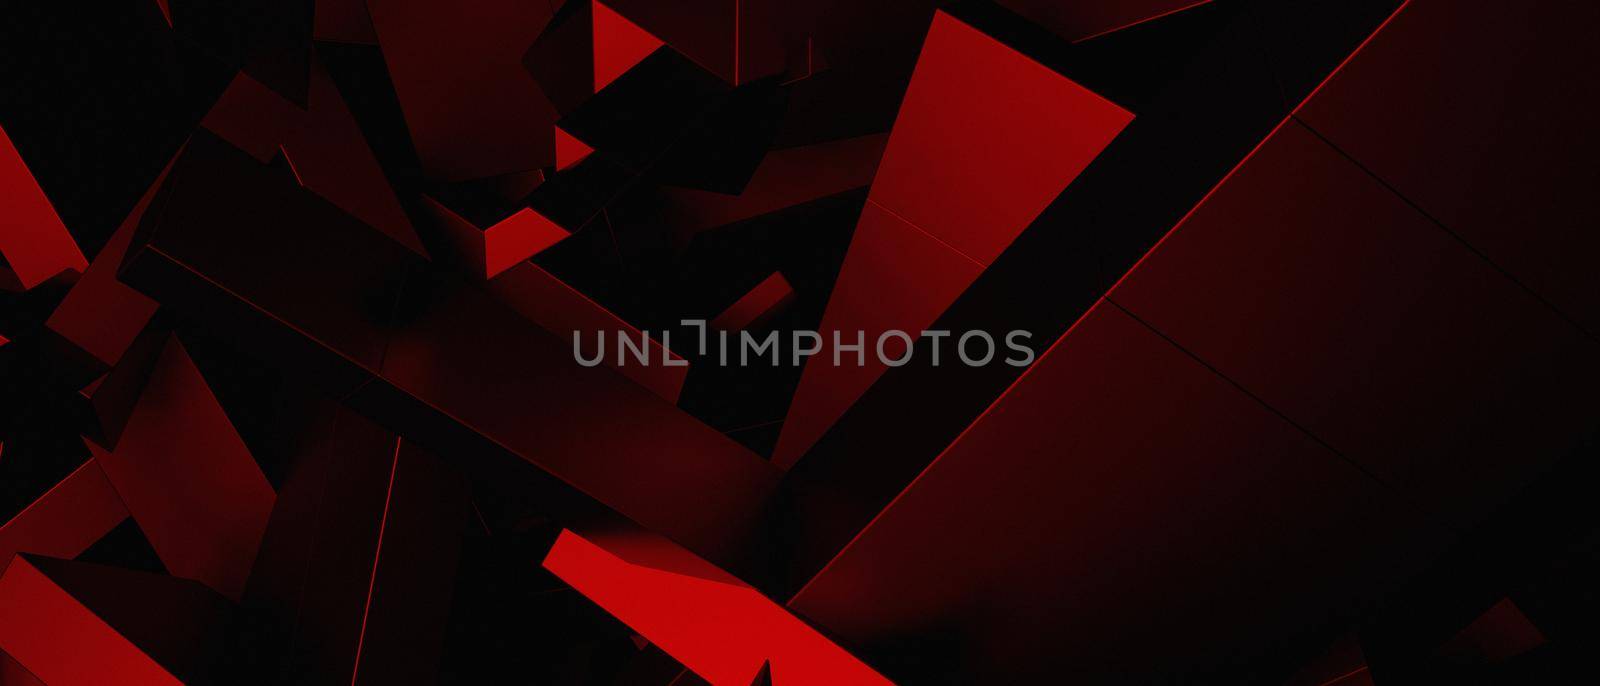 Abstract Luxurious 3D Cubes Trendy Futuristic Deep Red Iillustration Background Wallpaper 3D Render by yay_lmrb